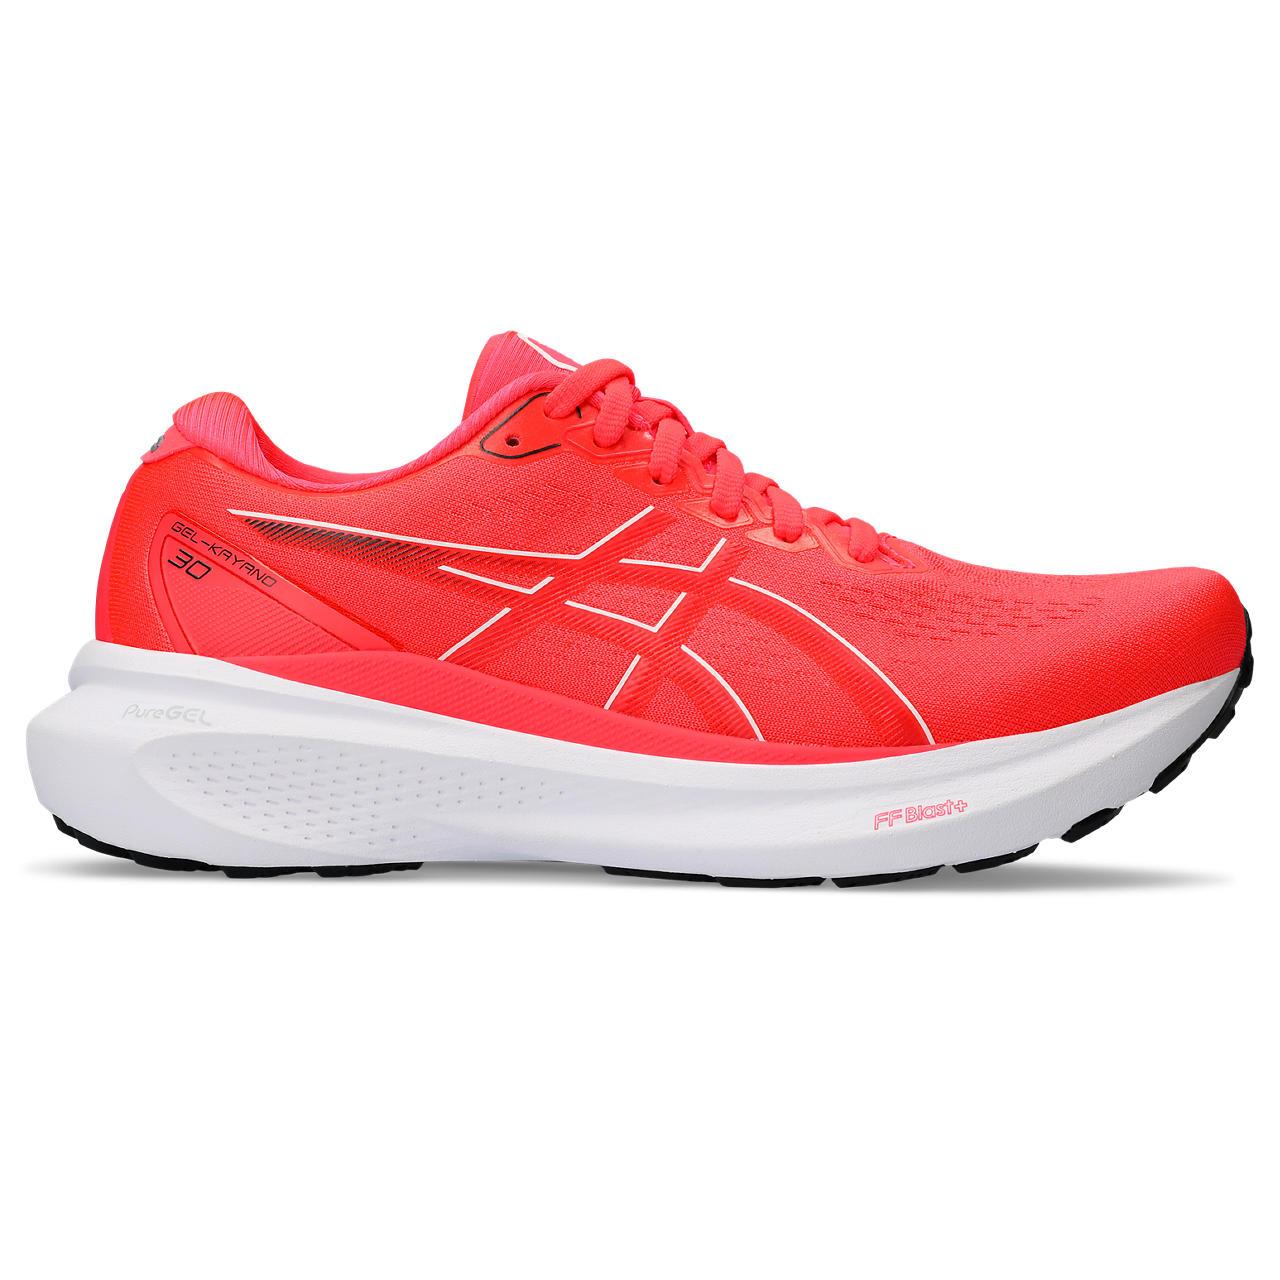 Asics Womens Gel-kayano 30 Running Shoes - Diva Pink/electric Red